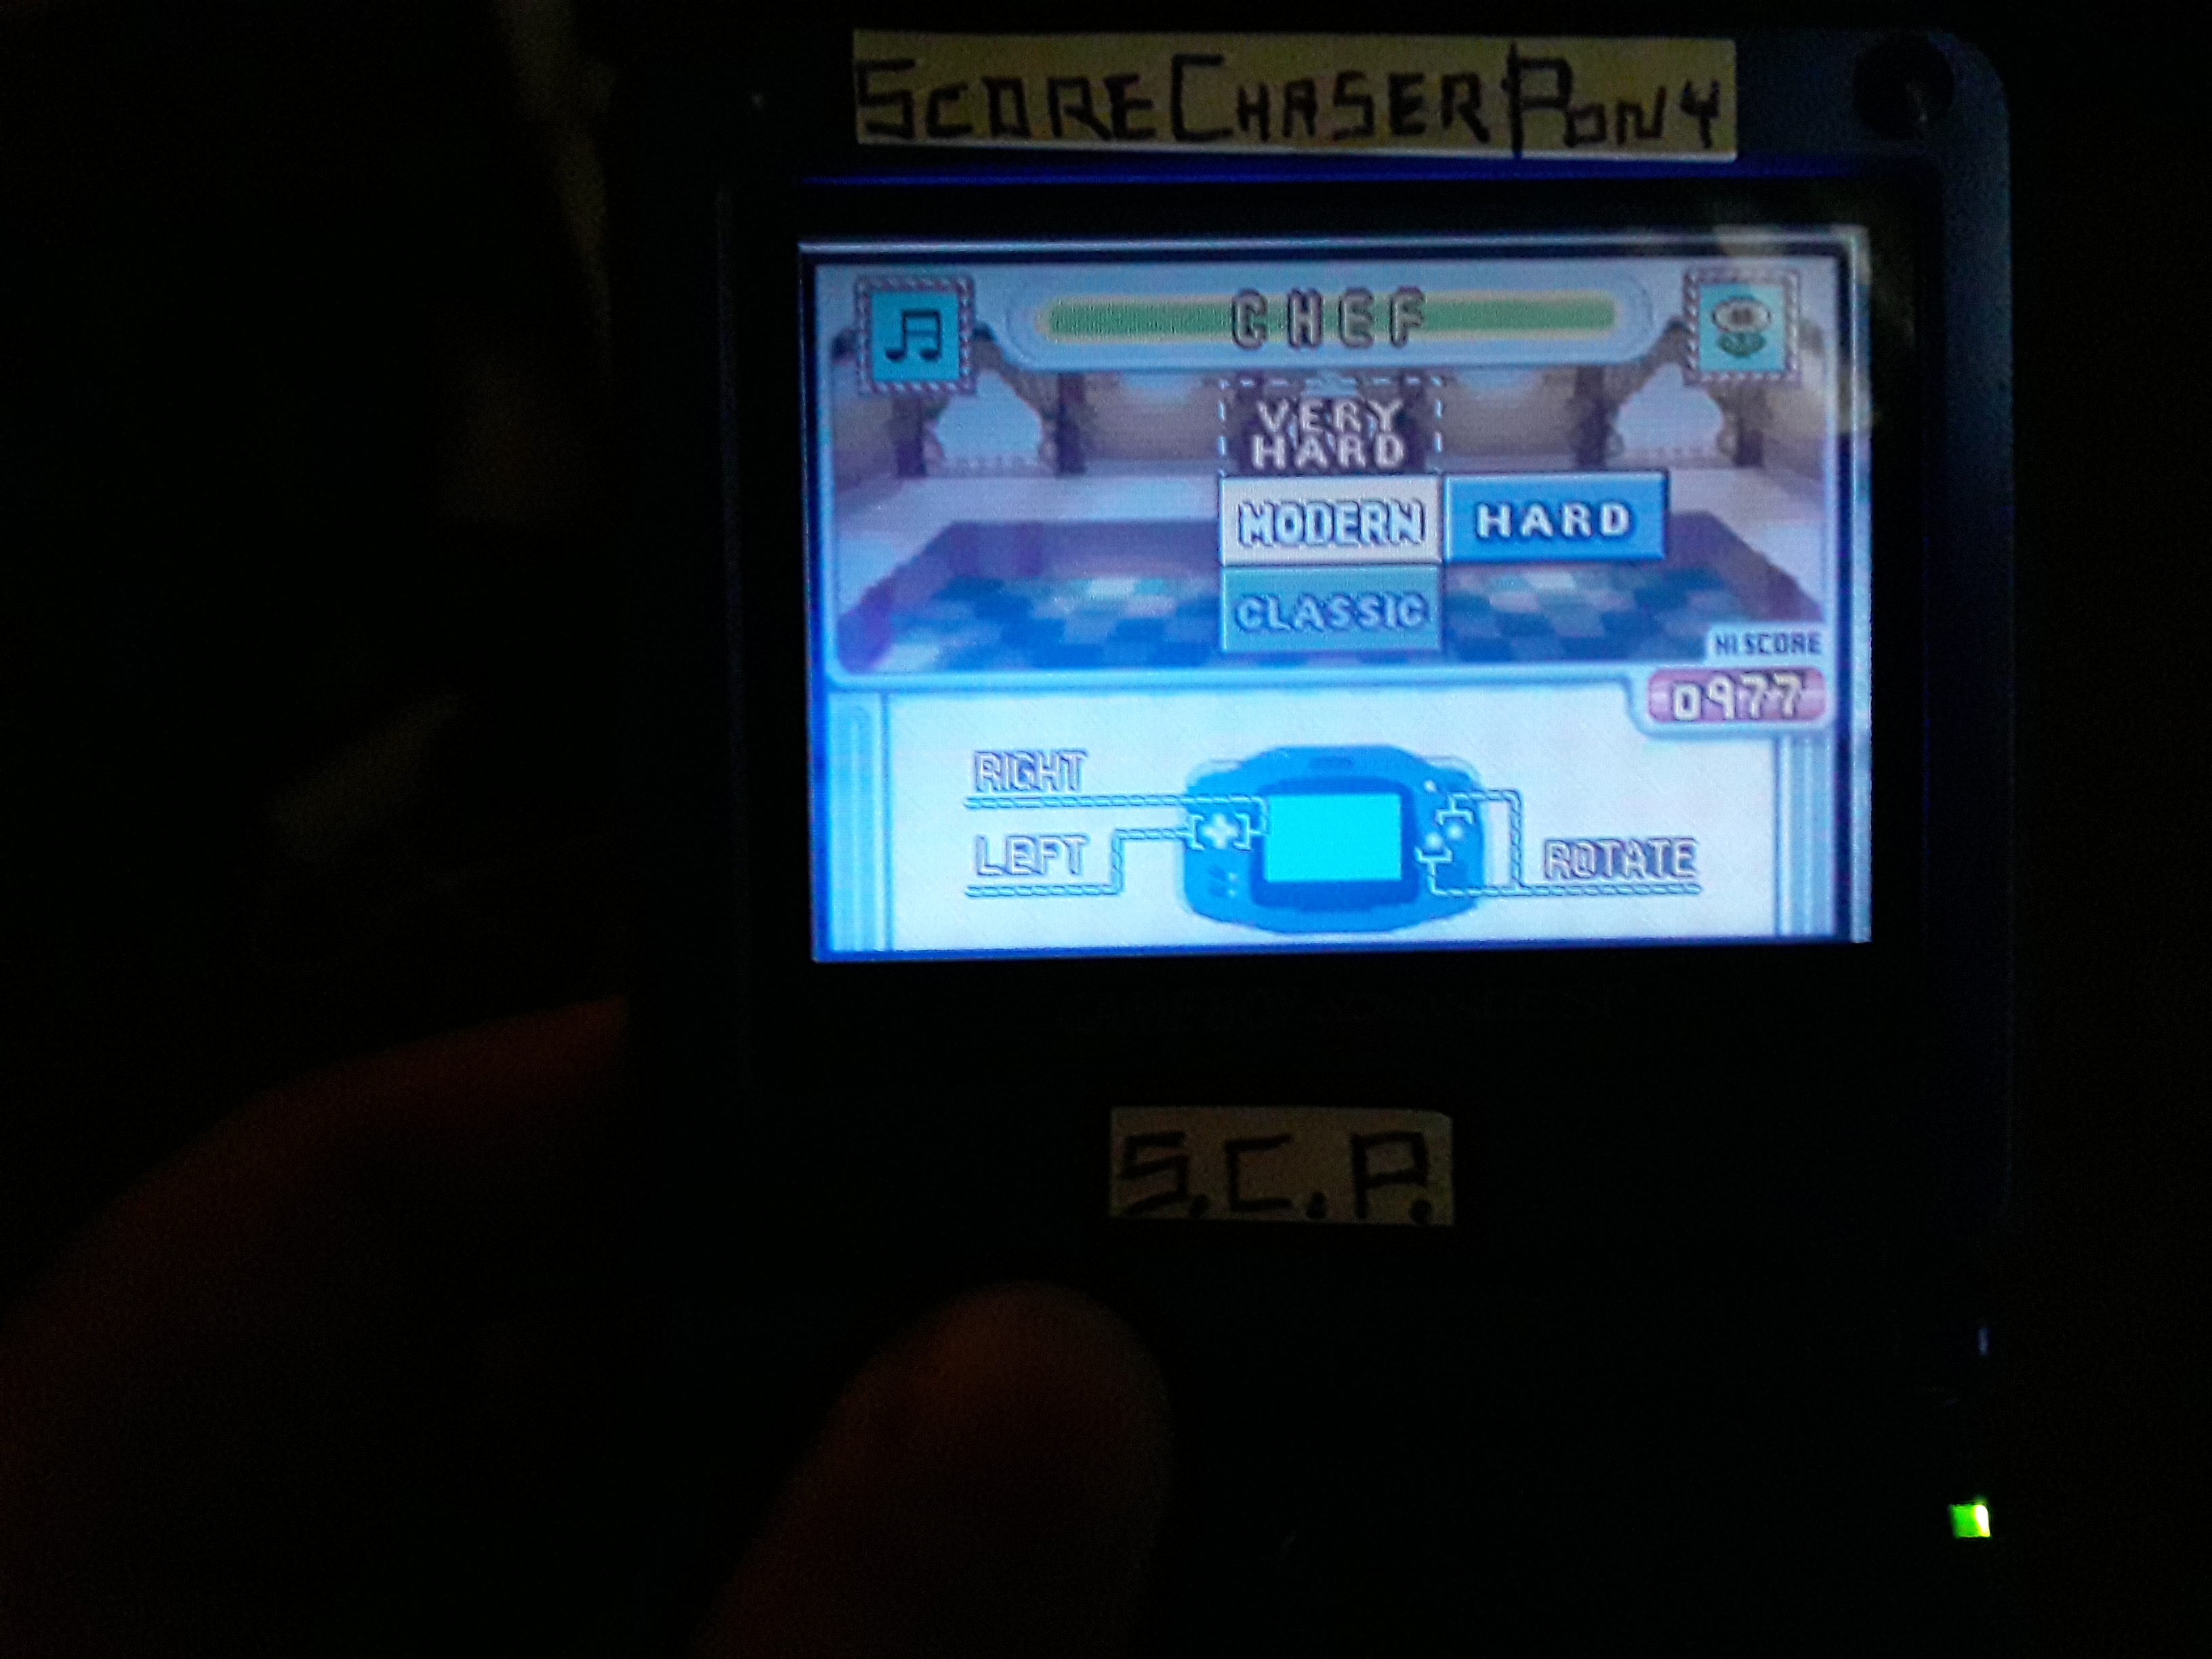 Scorechaserpony: Game & Watch Gallery 4: Chef [Modern: Hard] (GBA) 977 points on 2019-07-31 15:36:42